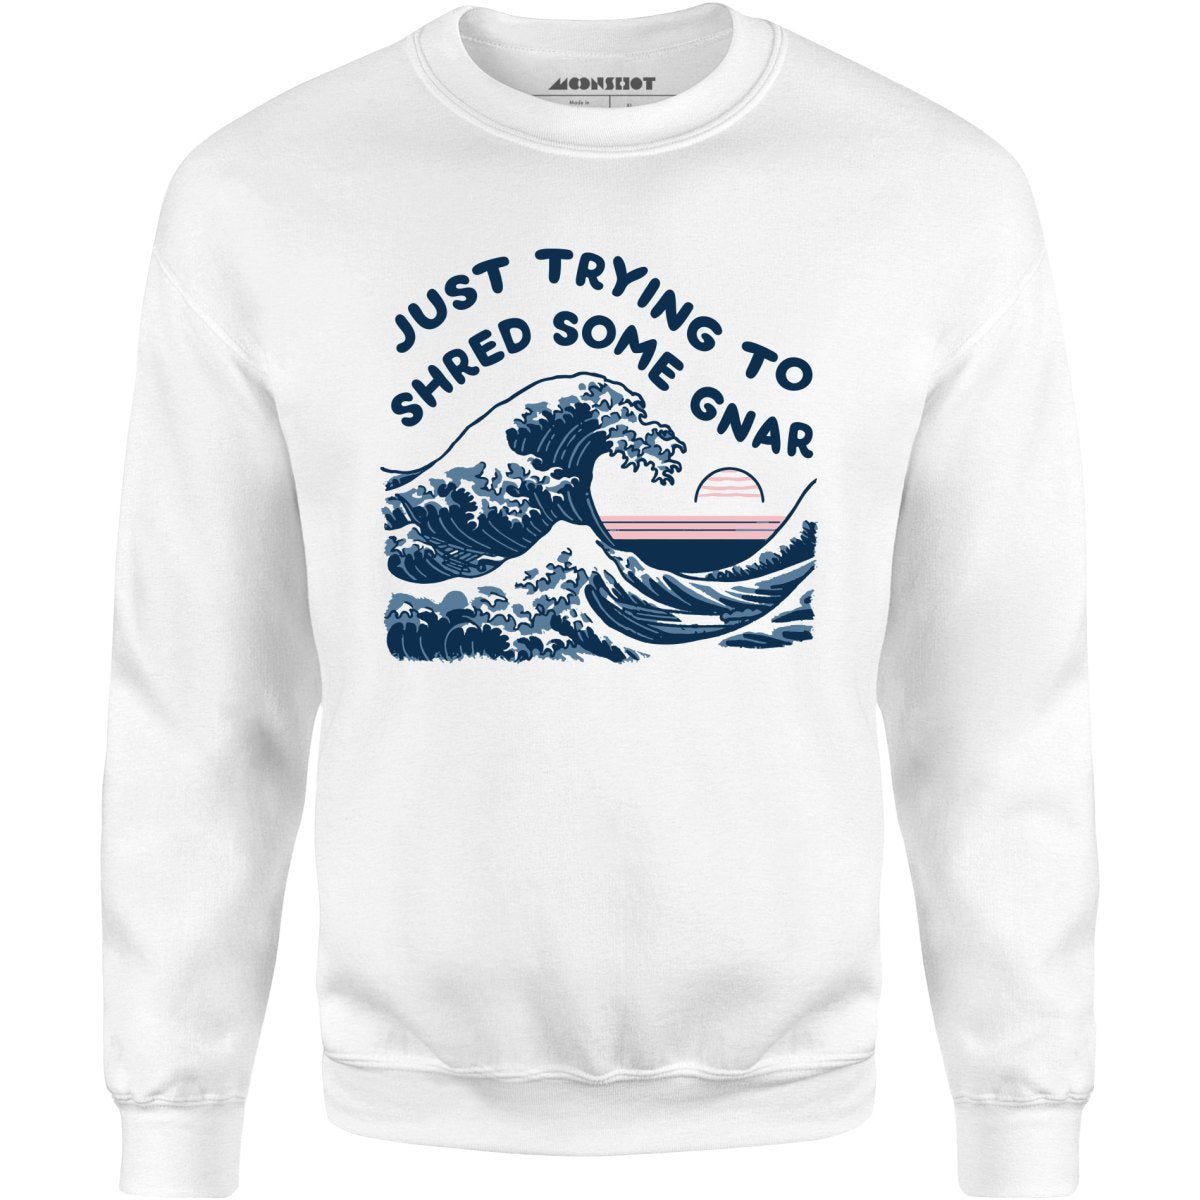 Just Trying to Shred Some Gnar - Unisex Sweatshirt